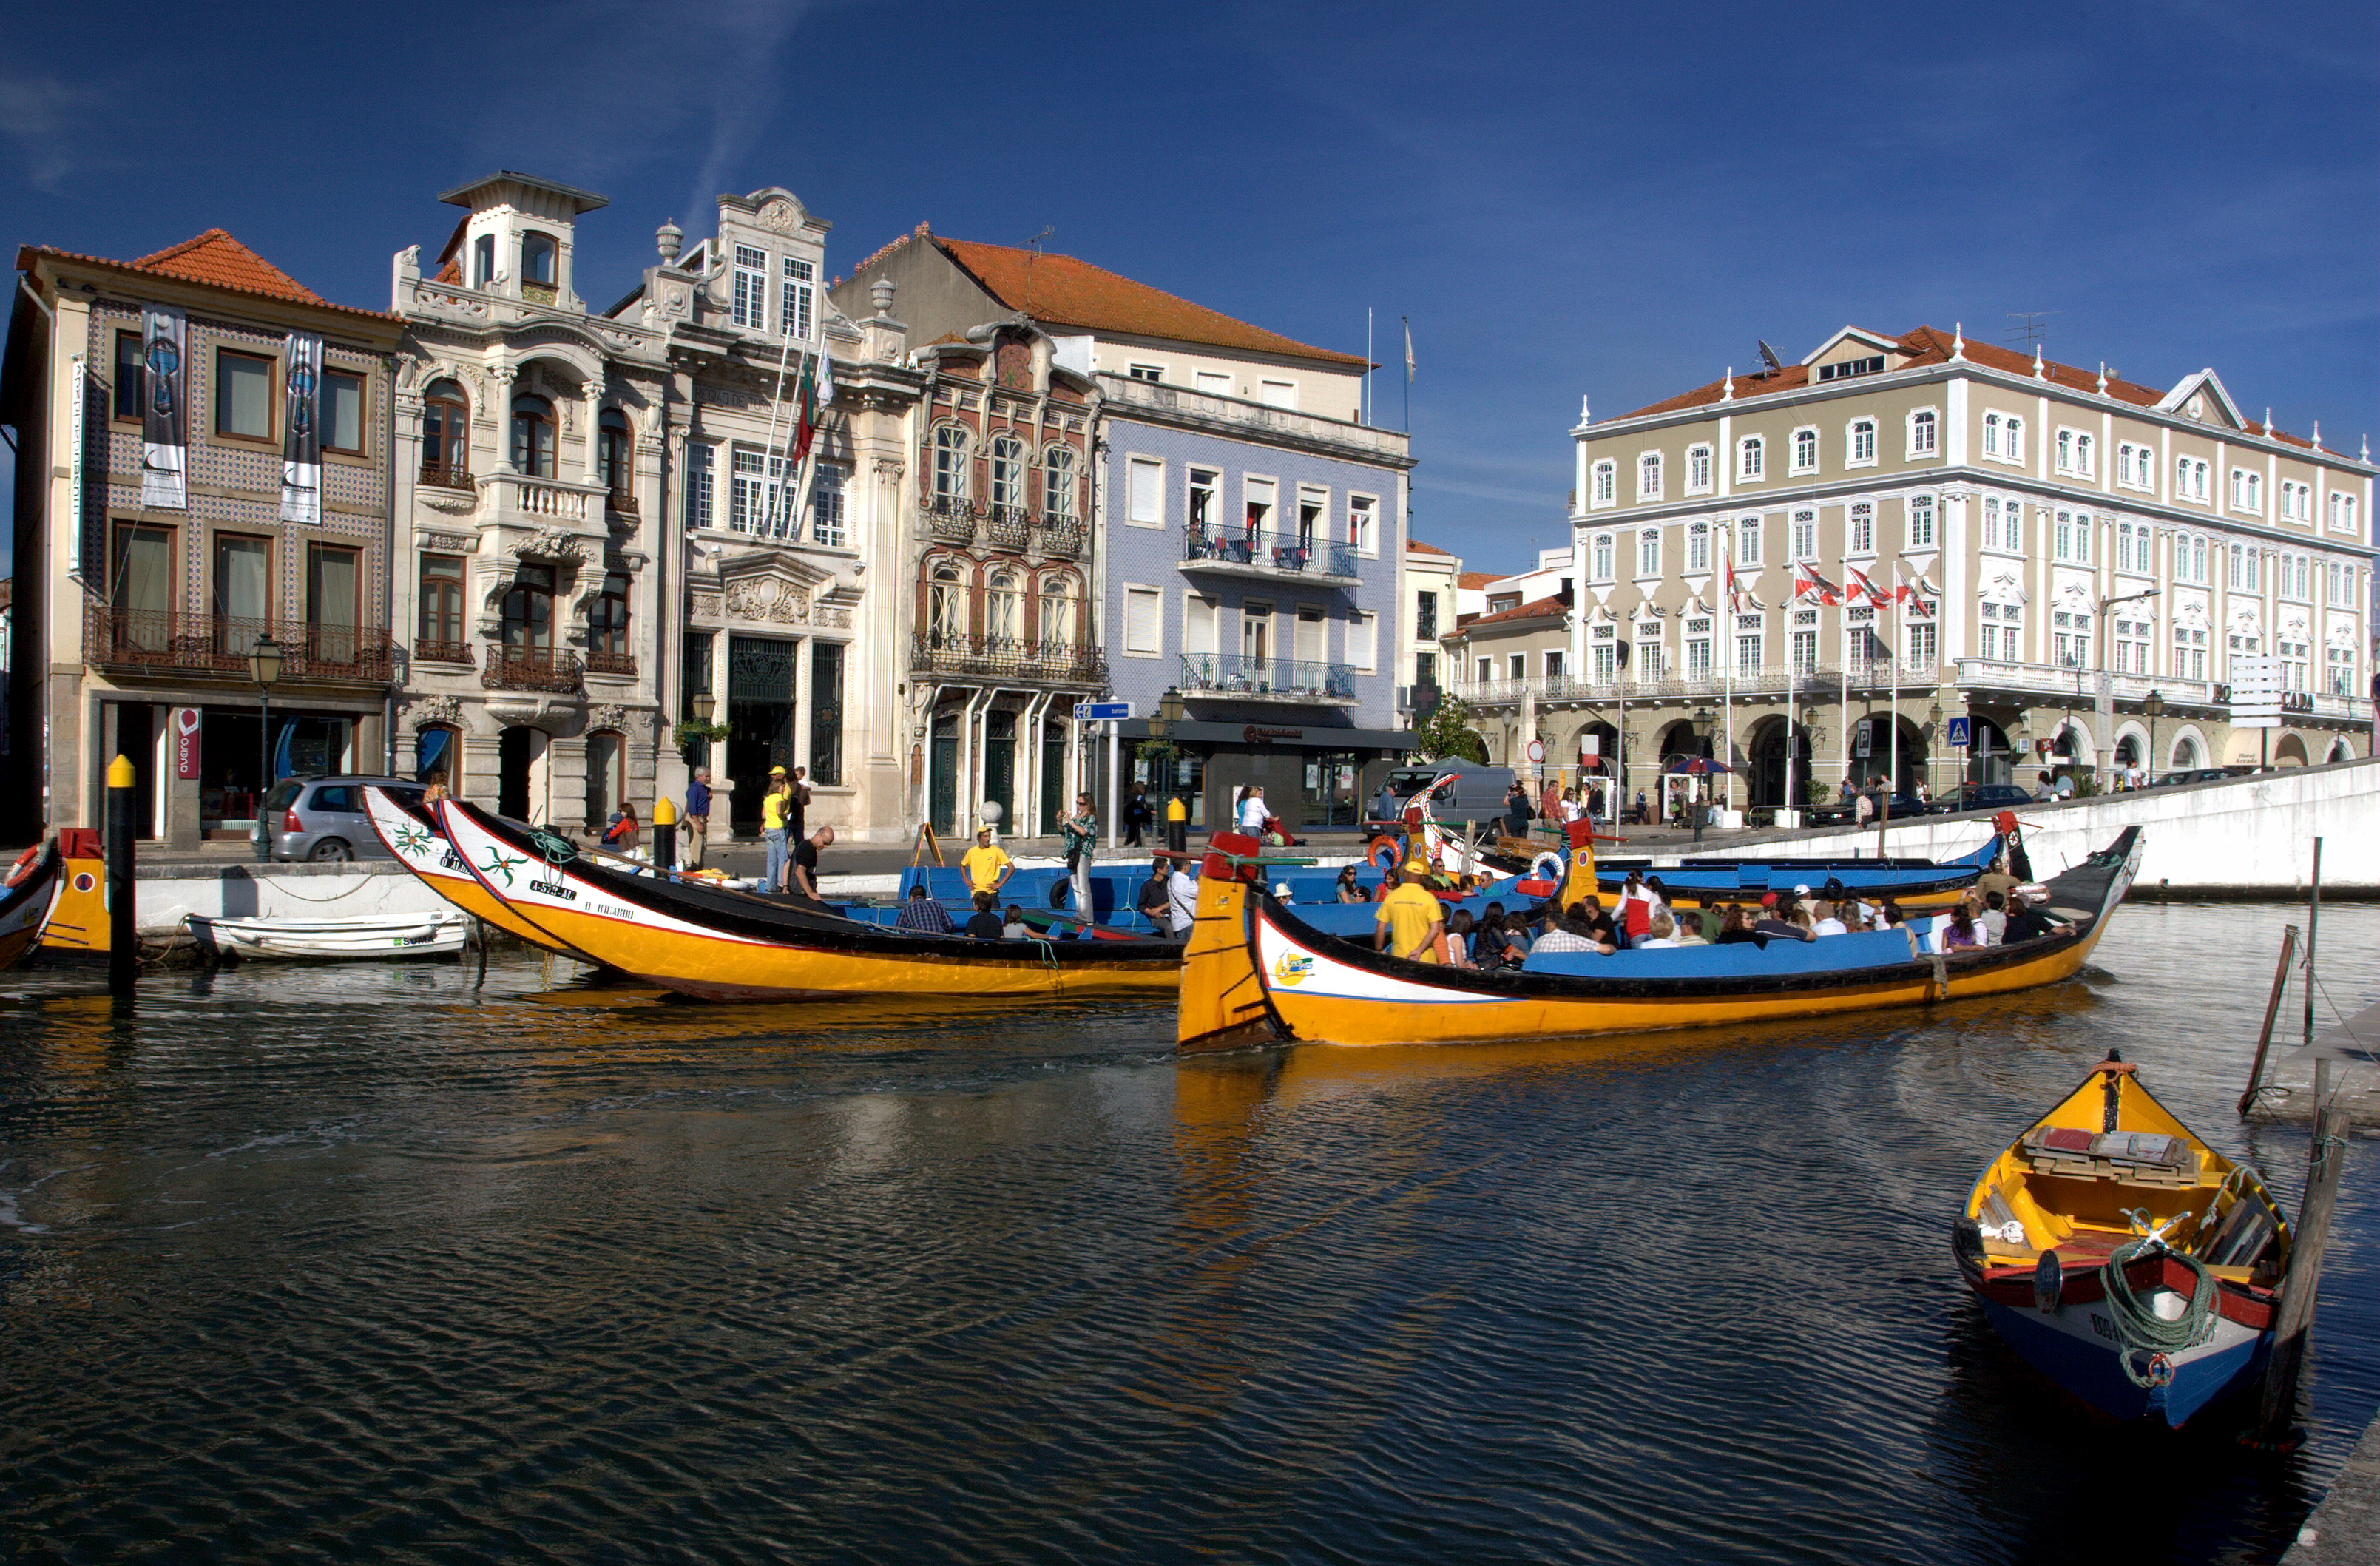 Aveiro wallpapers, Man Made, HQ Aveiro pictures | 4K Wallpapers 2019